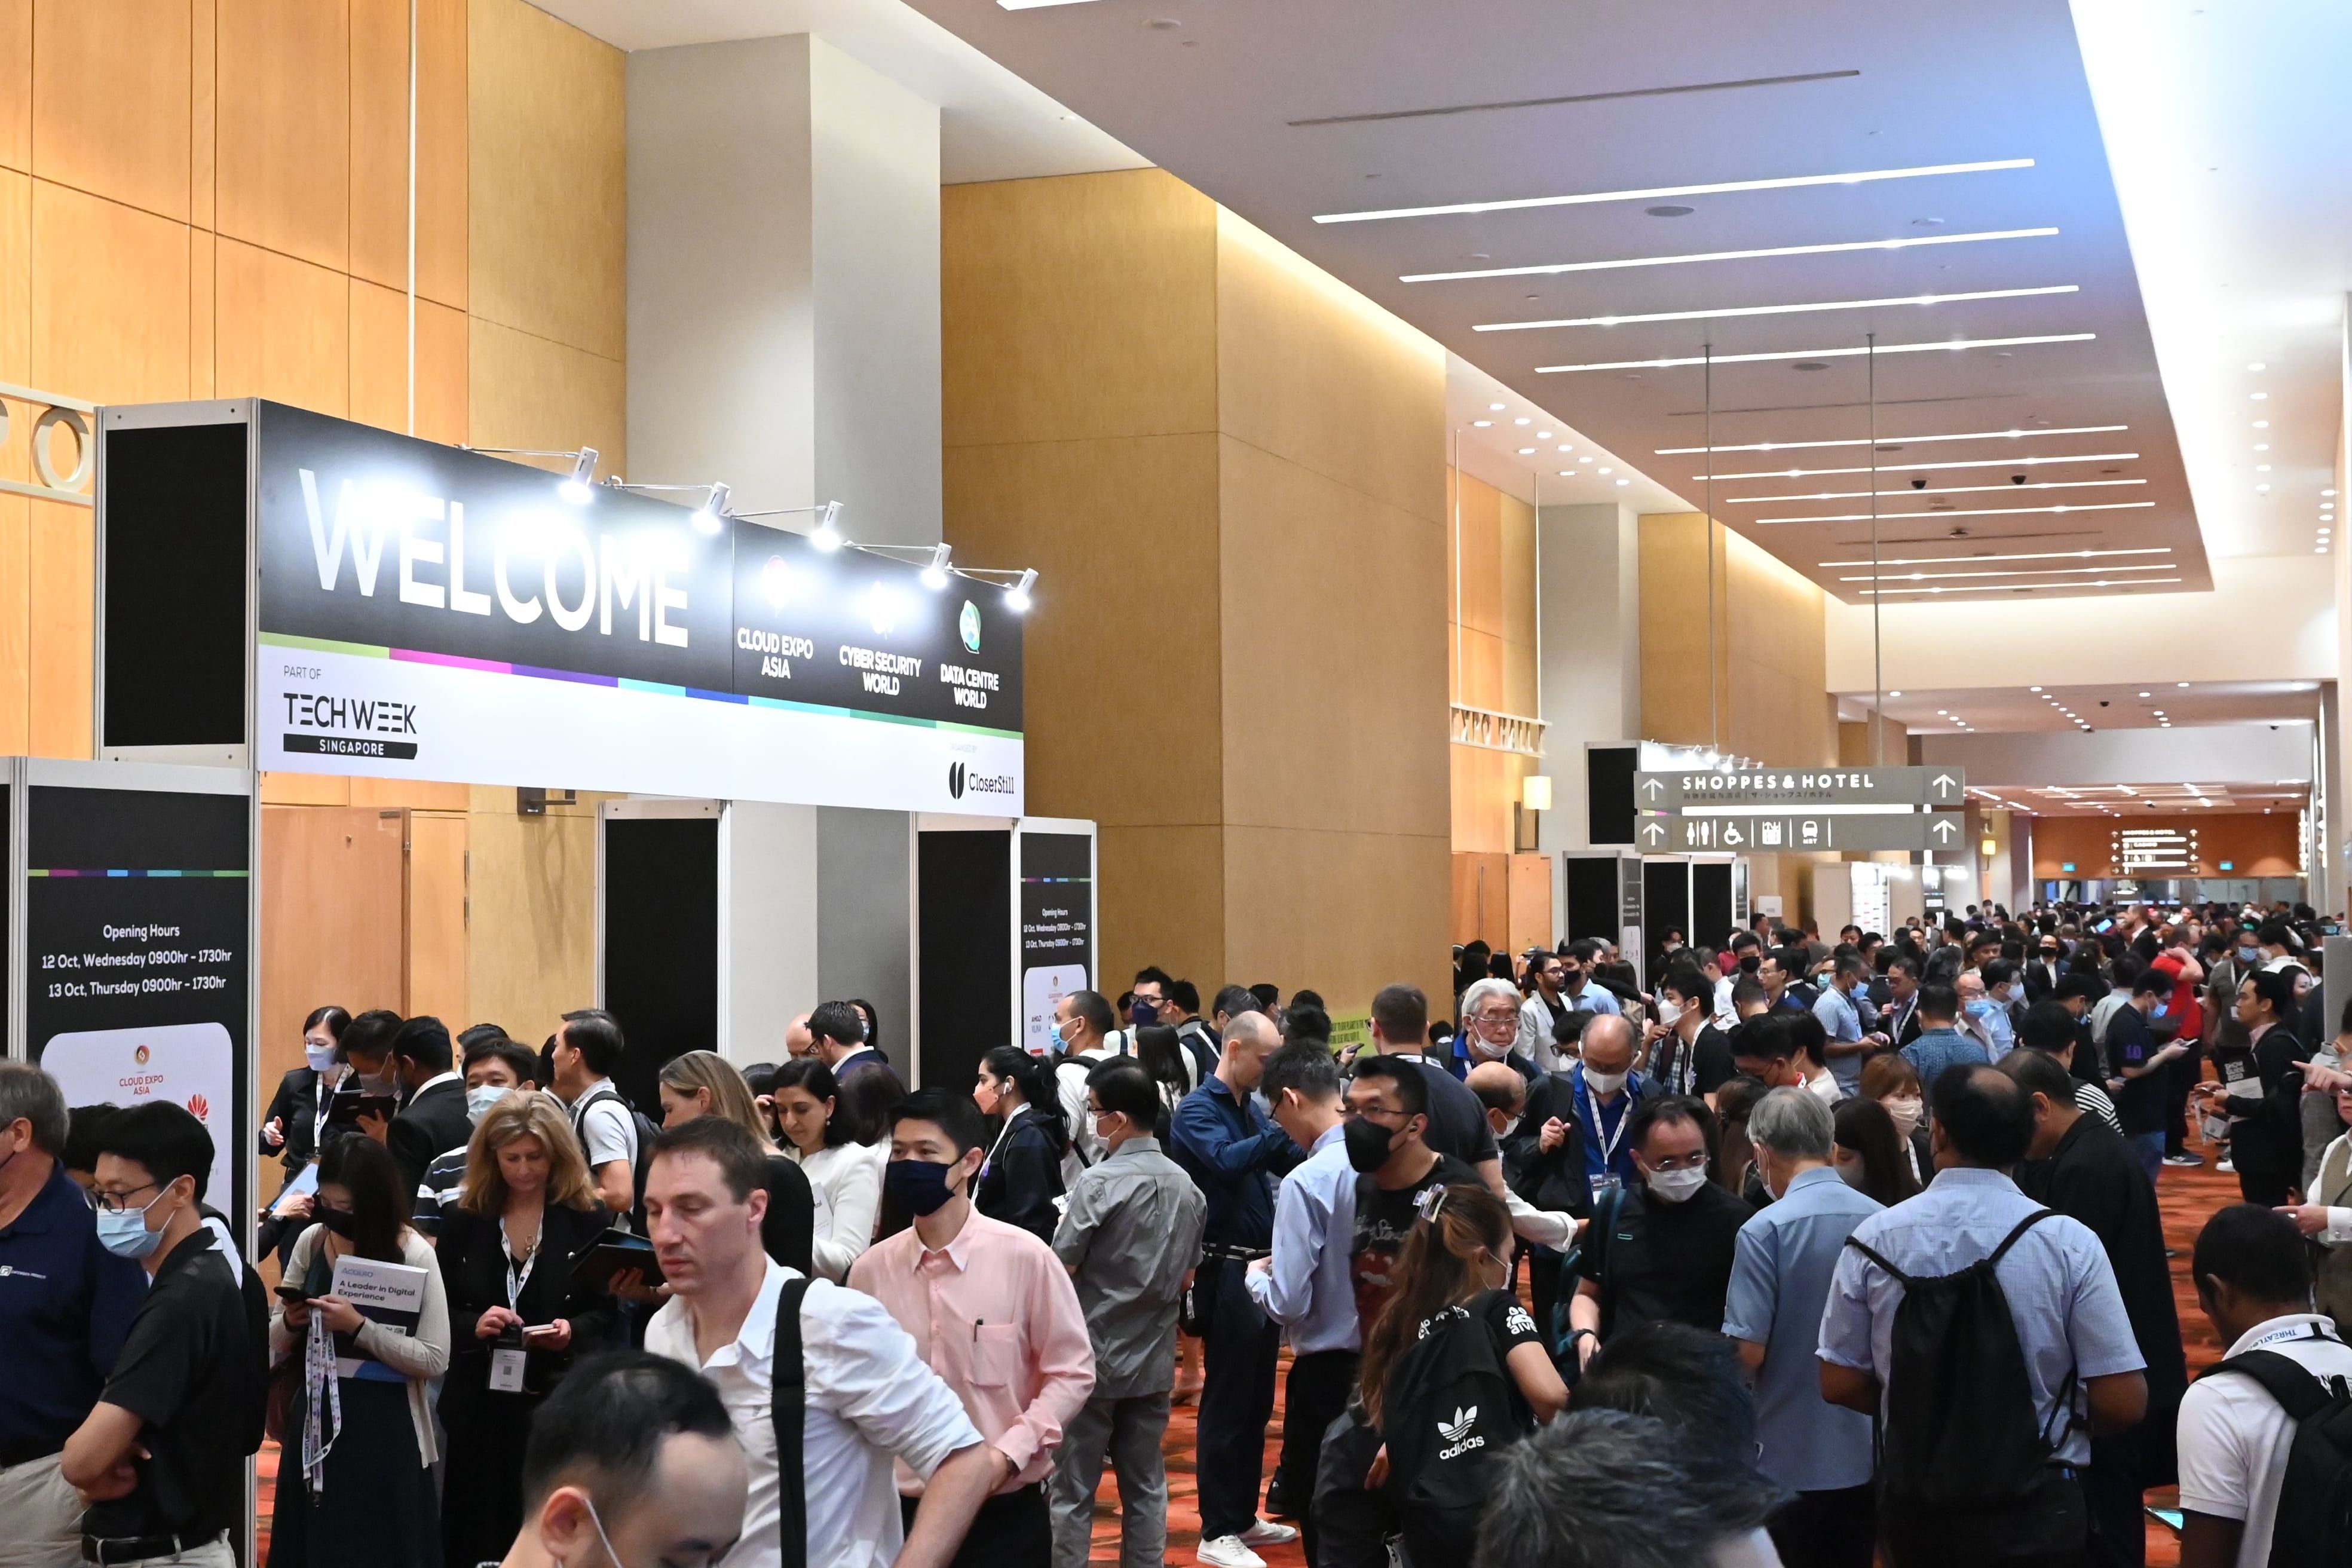 cloud expo asia exhibition floor filled with delegates